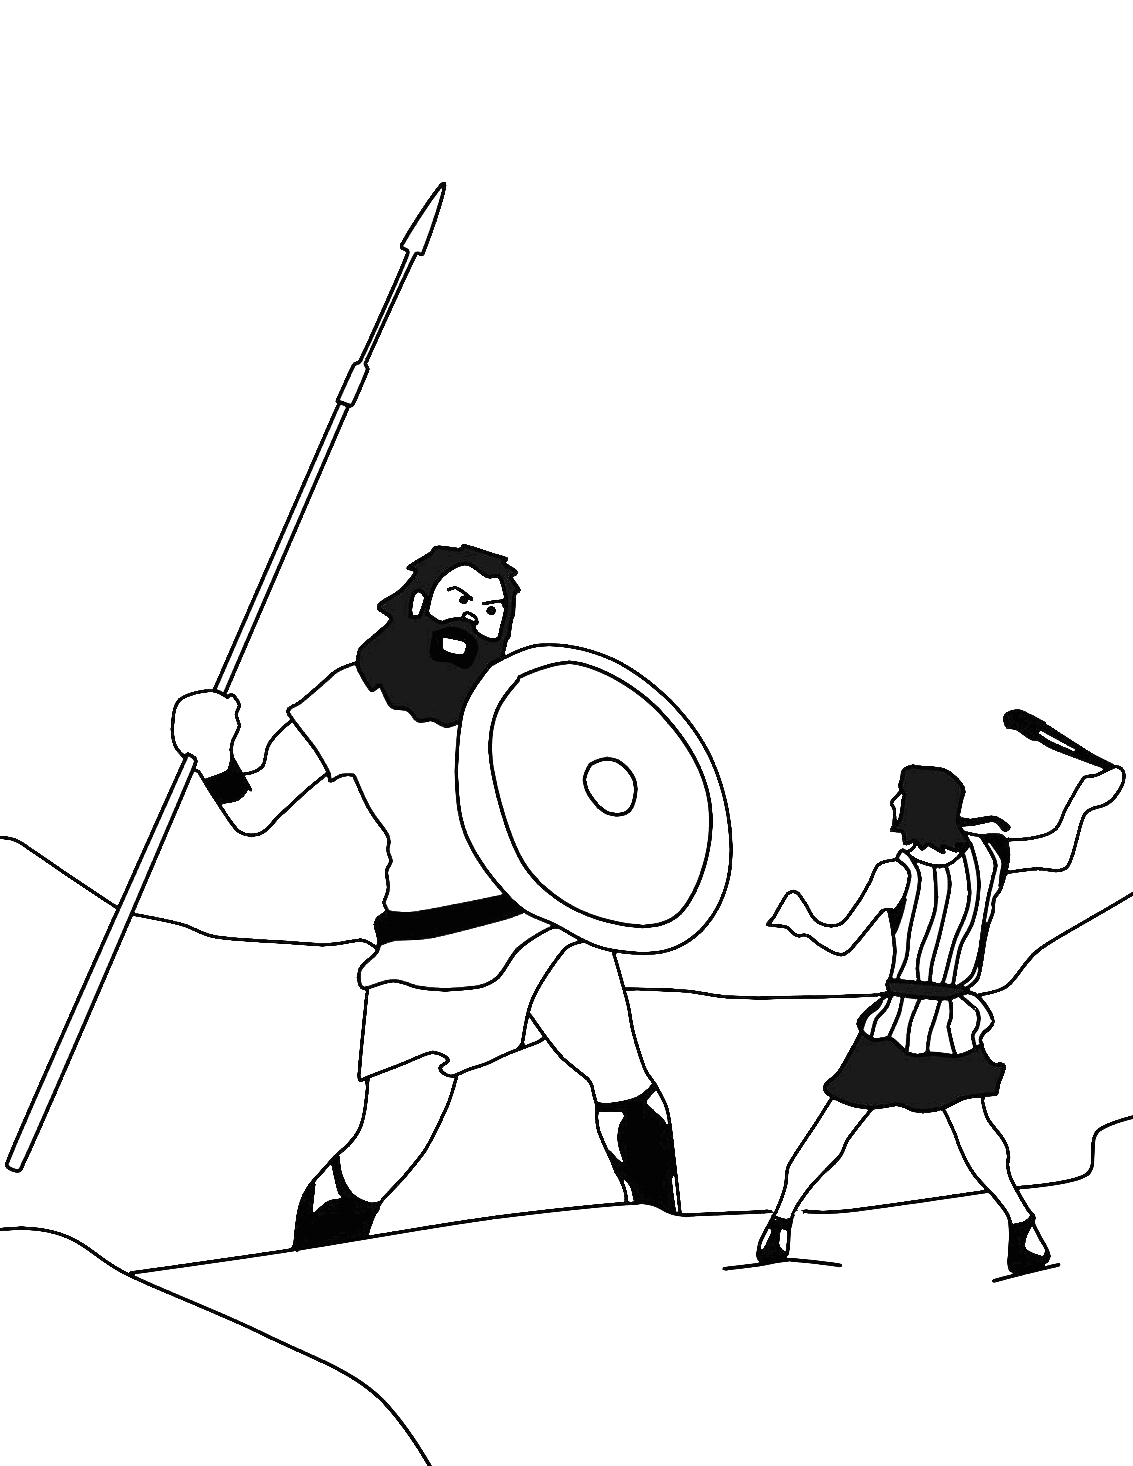 david-and-goliath-fighting-coloring-page-free-printable-coloring-pages-for-kids